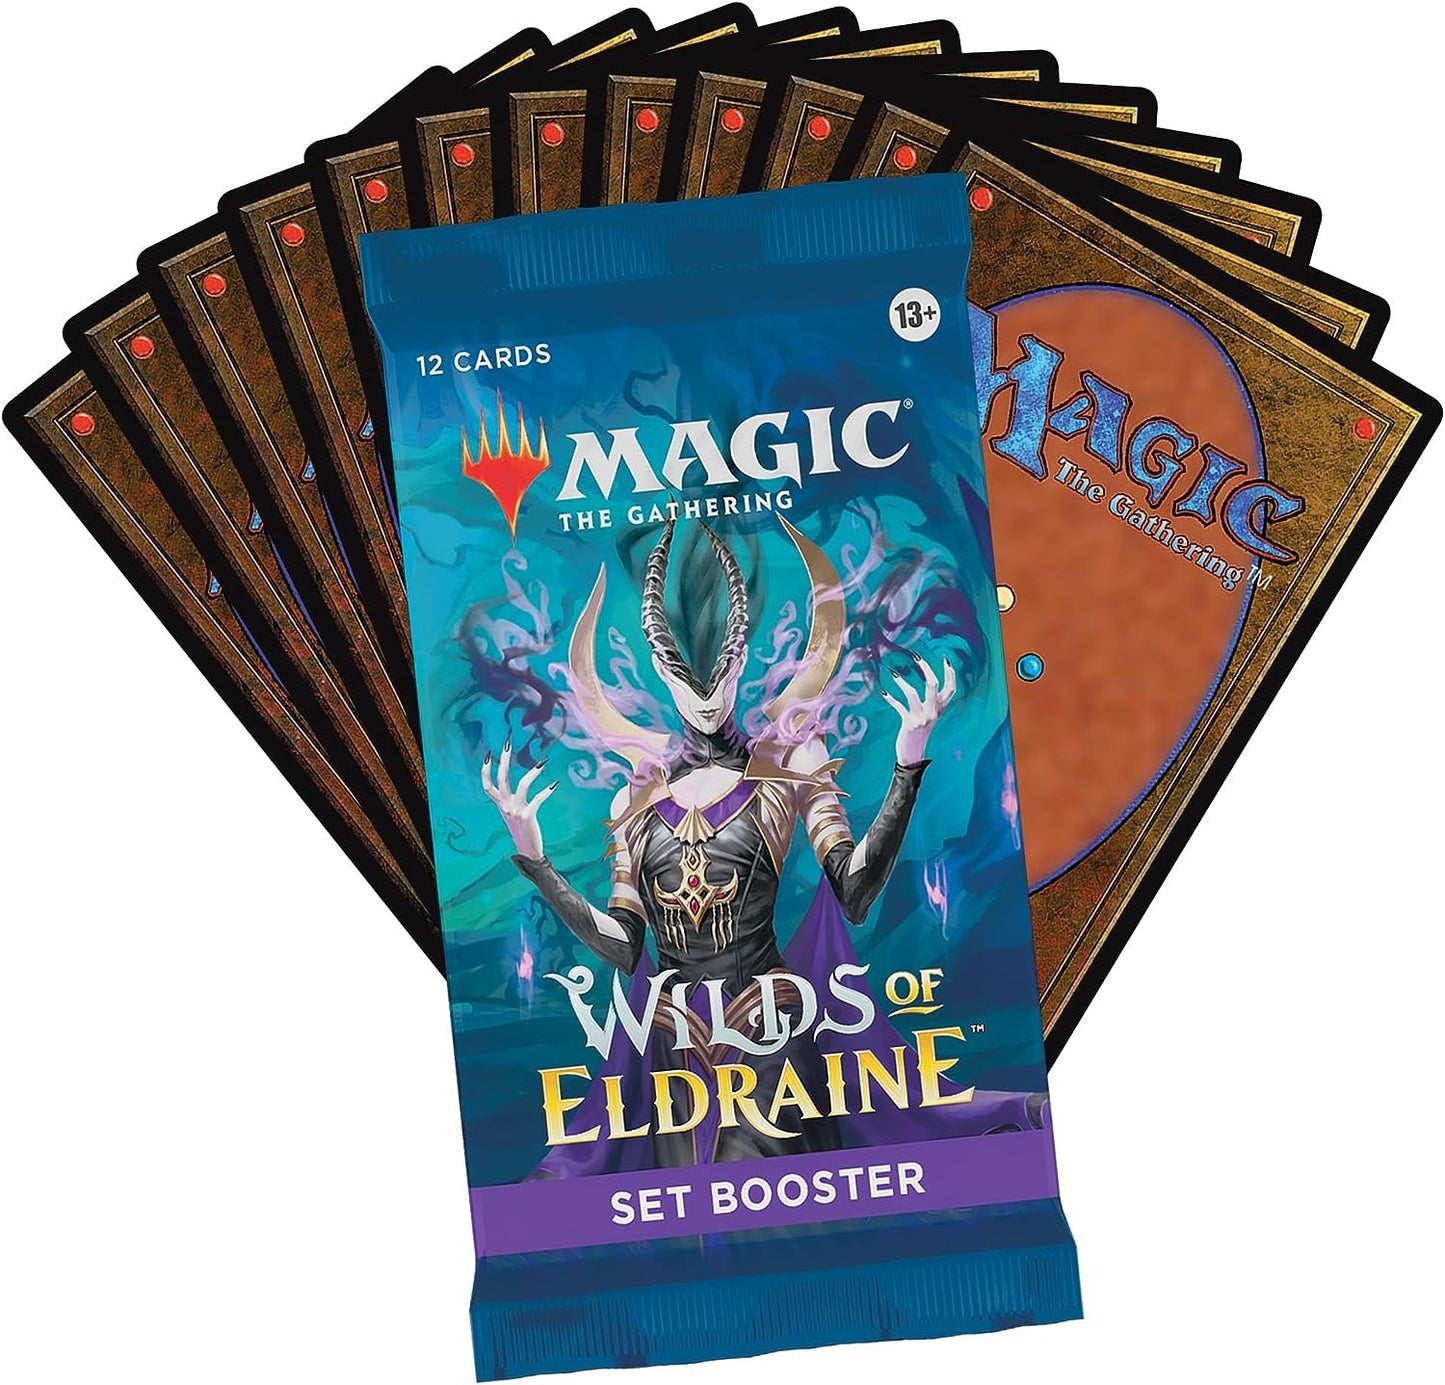 Magic: The Gathering - Wilds of Eldraine - Set Booster